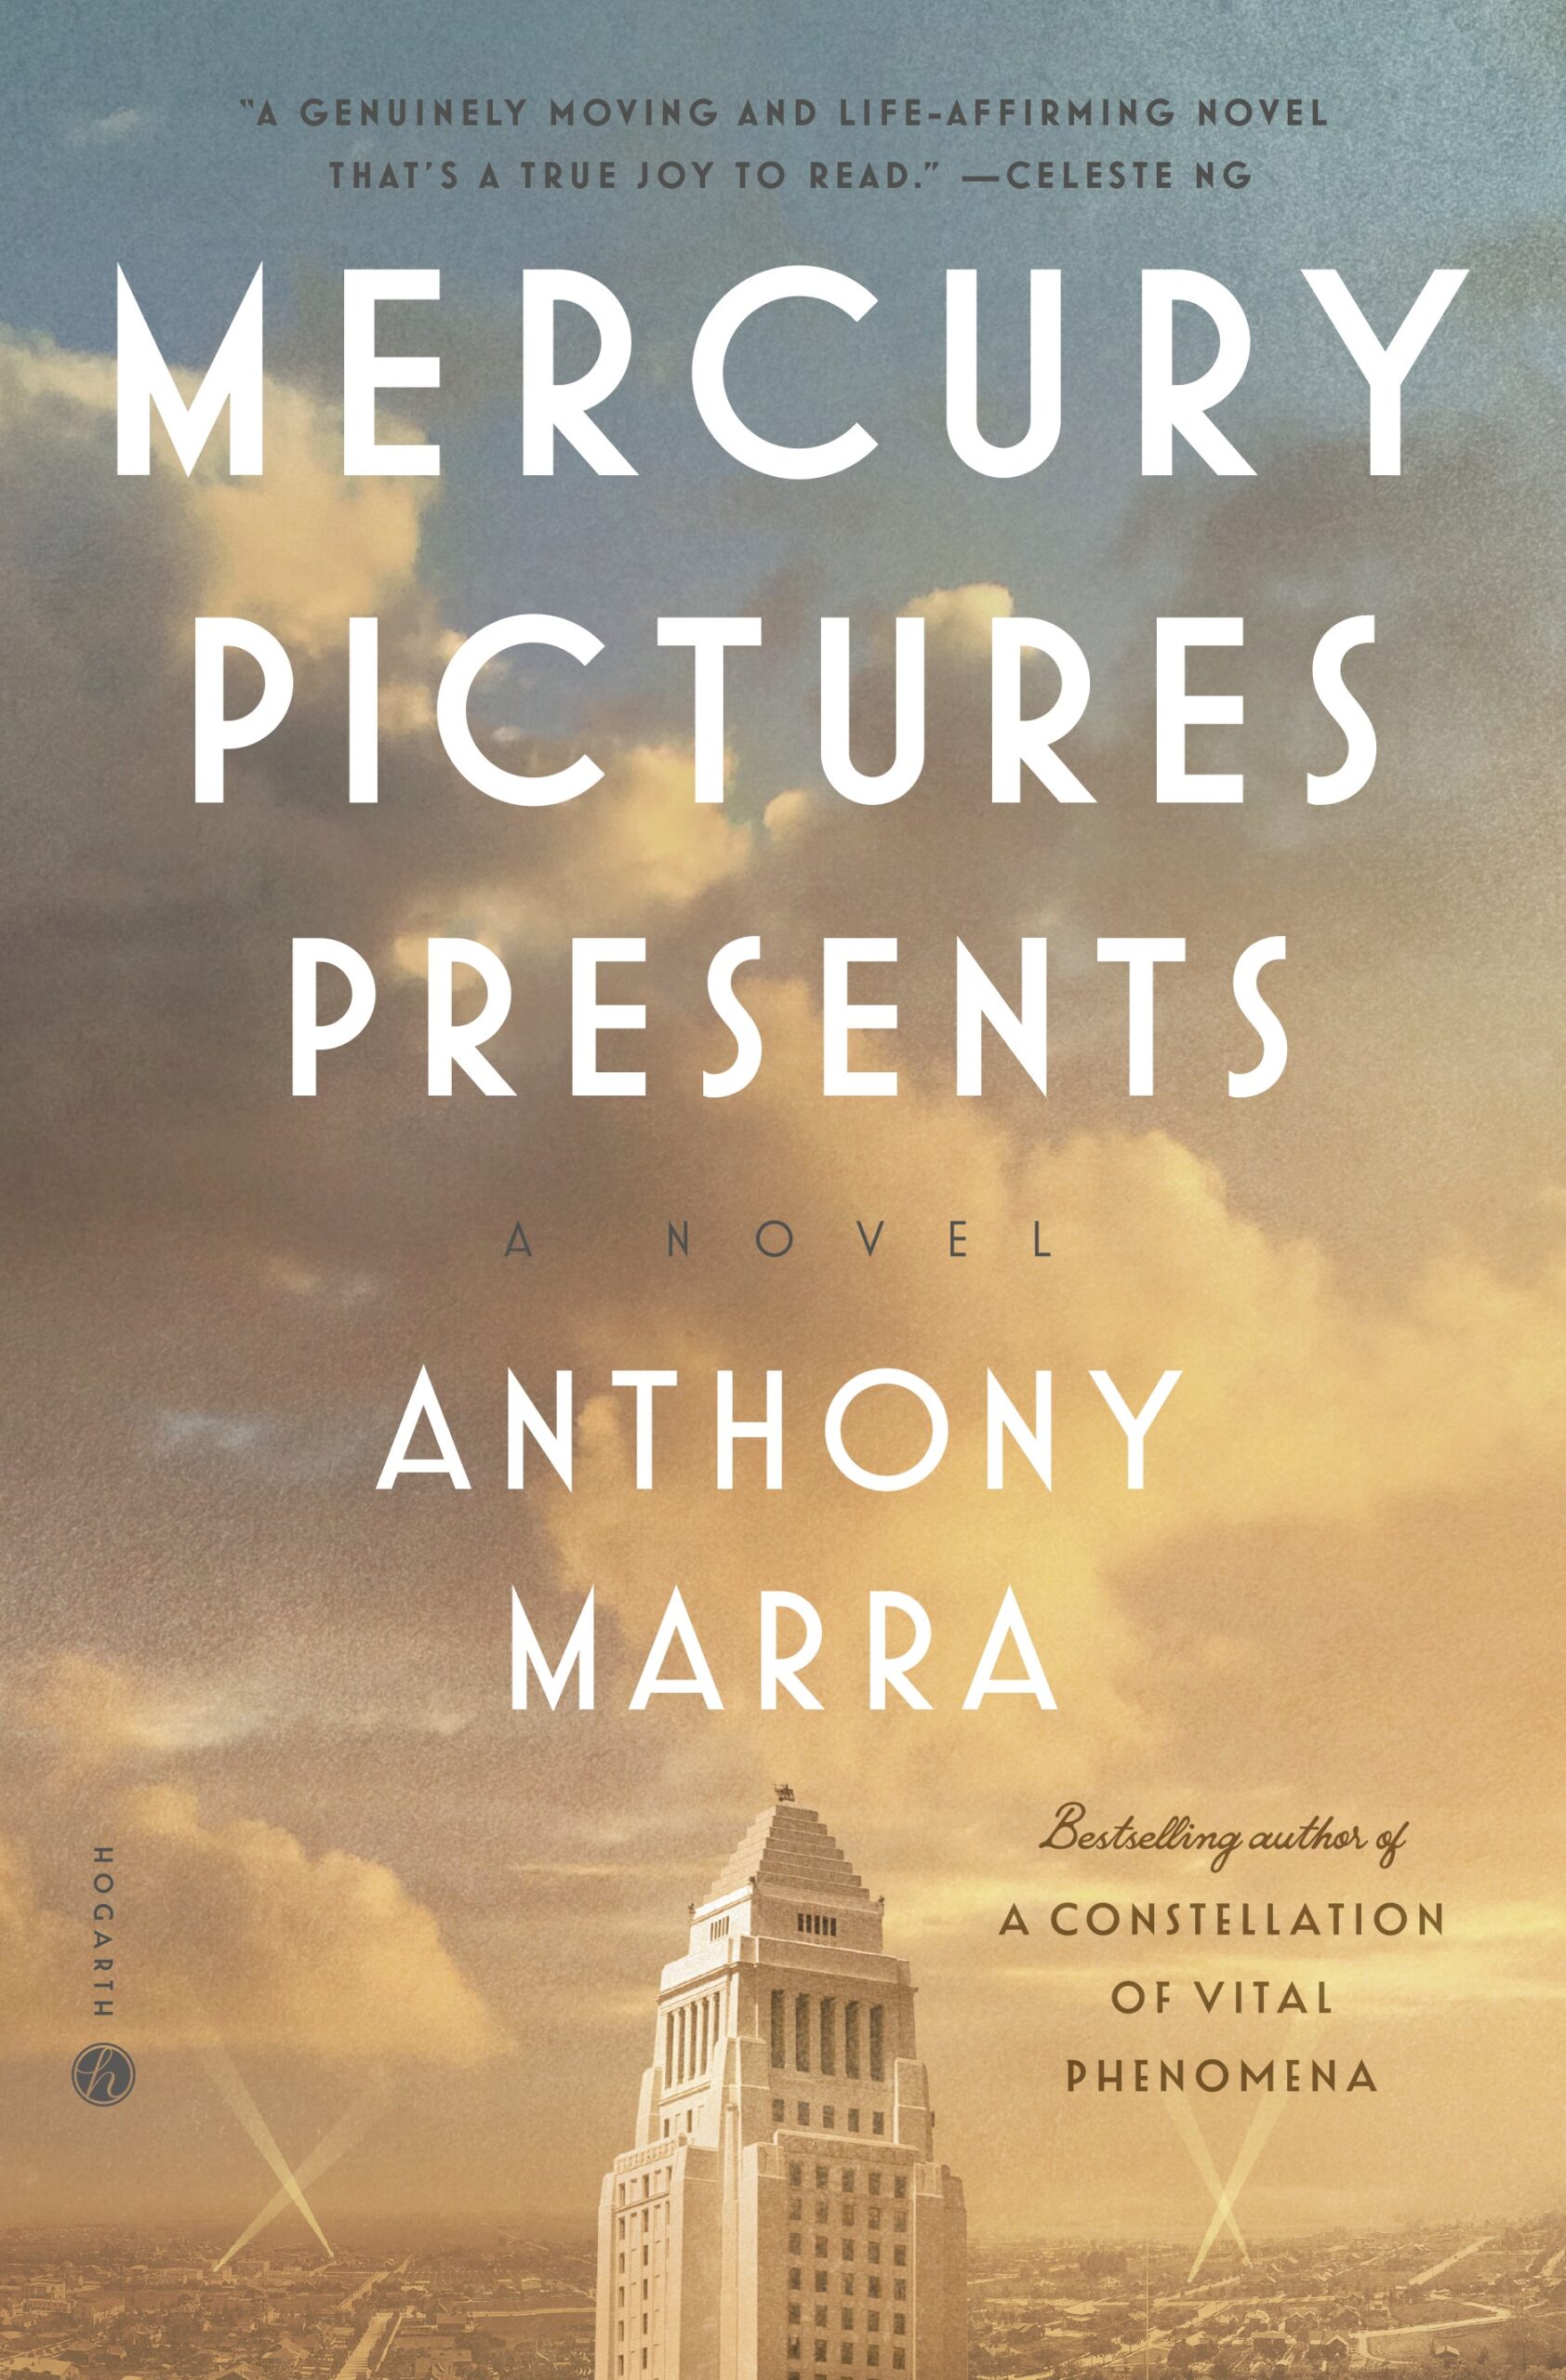 Anthony Marra reads from Mercury Pictures Presents: A Novel (Hogarth, 2022)